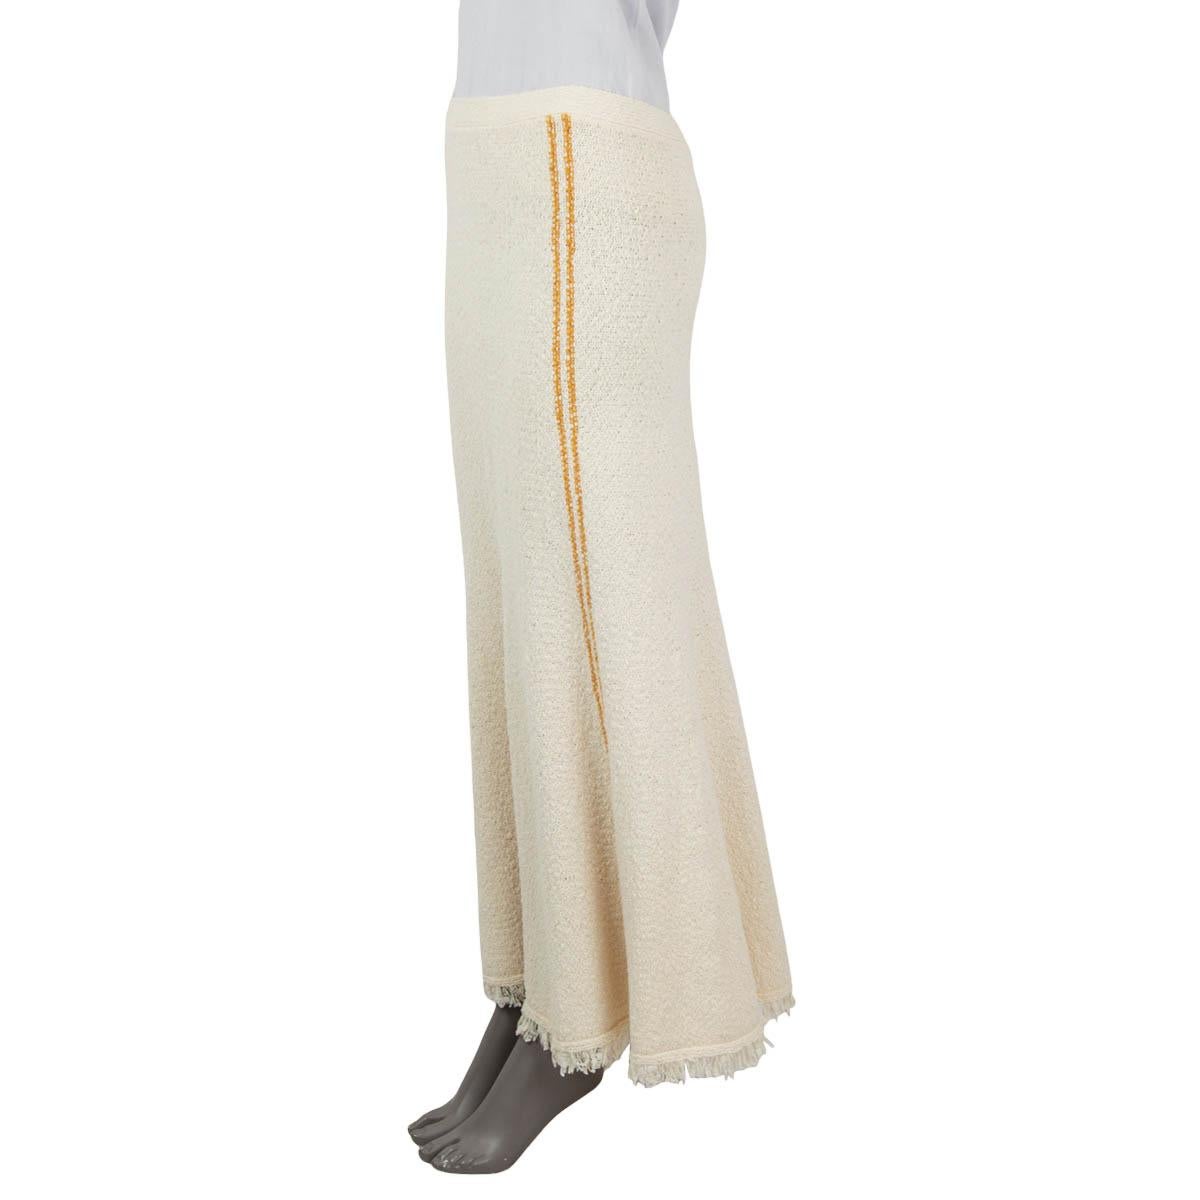 100% authentic Victoria Beckham bouclé-knit maxi skirt in ecru coloured cotton (60%) and polyamide (40%). Features an elasticated waist, mustard side stripes and a fringed hem. Has been worn and is in excellent condition.

Measurements
Tag